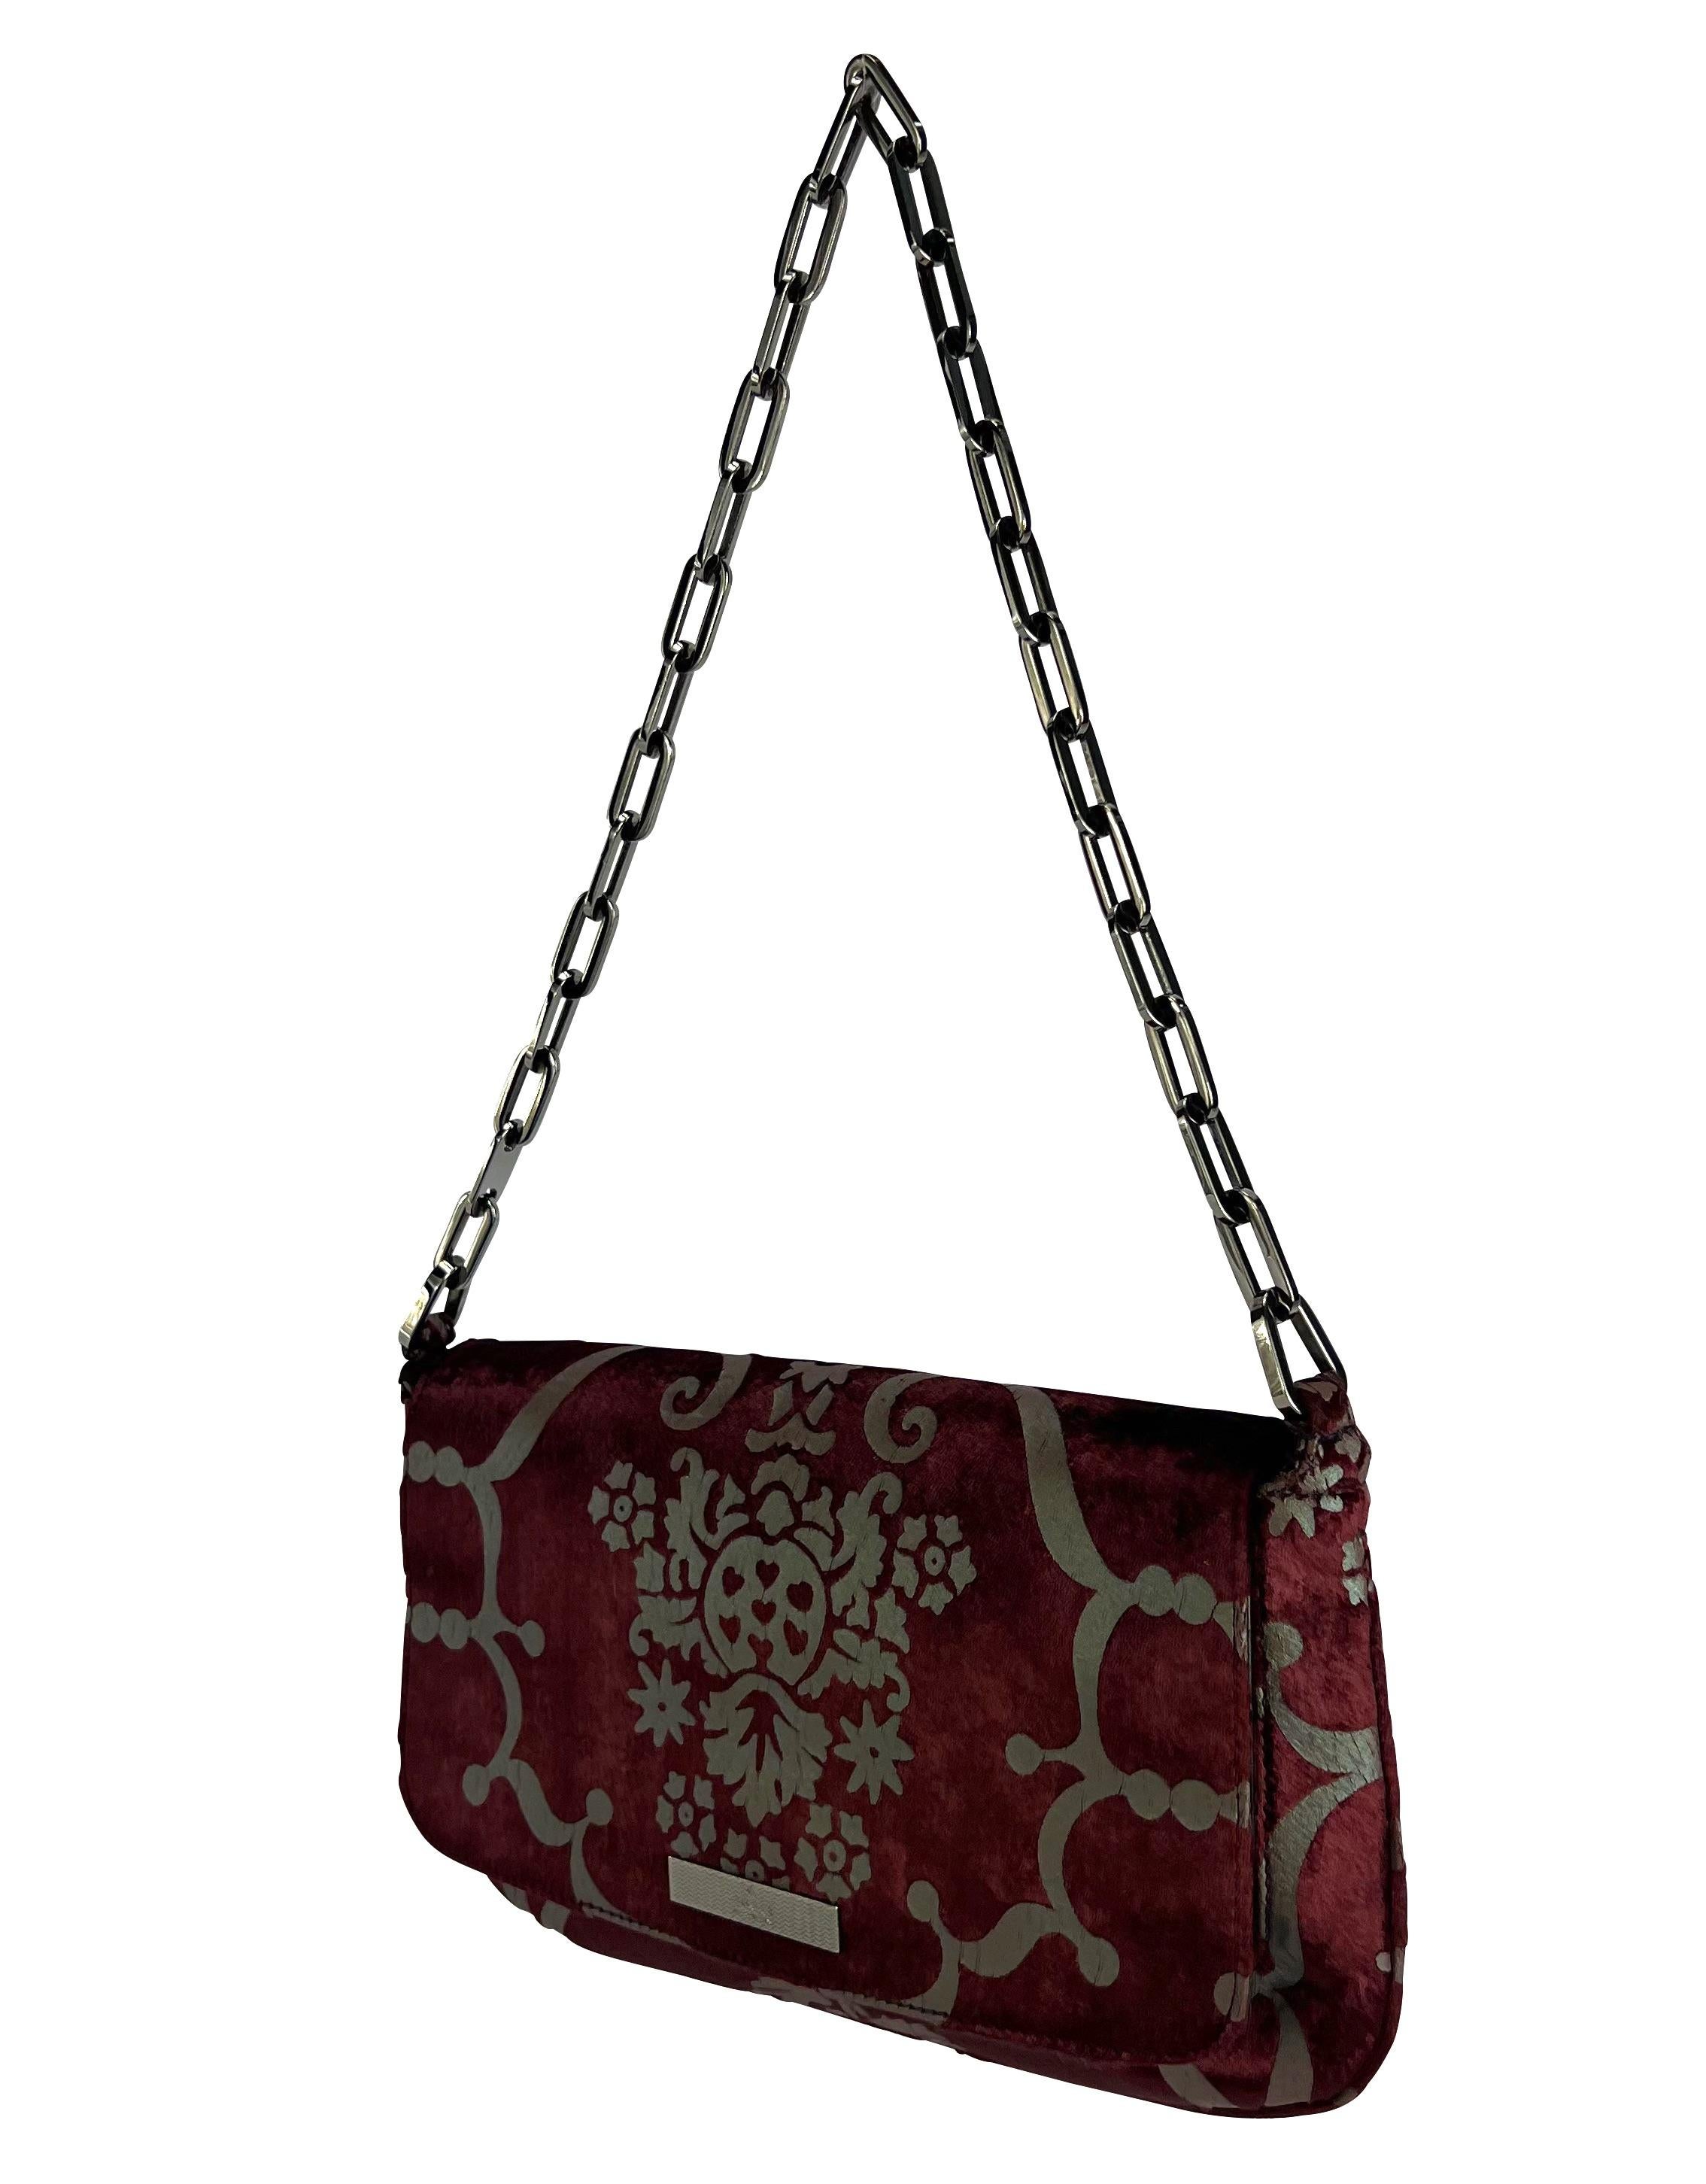 Presenting a fabulous burgundy velvet Gucci chain shoulder bag, designed by Tom Ford. From the Spring/Summer 2000 collection, this bag features a gunmetal-tone baroque pattern atop the luxurious deep red velvet. Add this timeless Gucci by Tom Ford